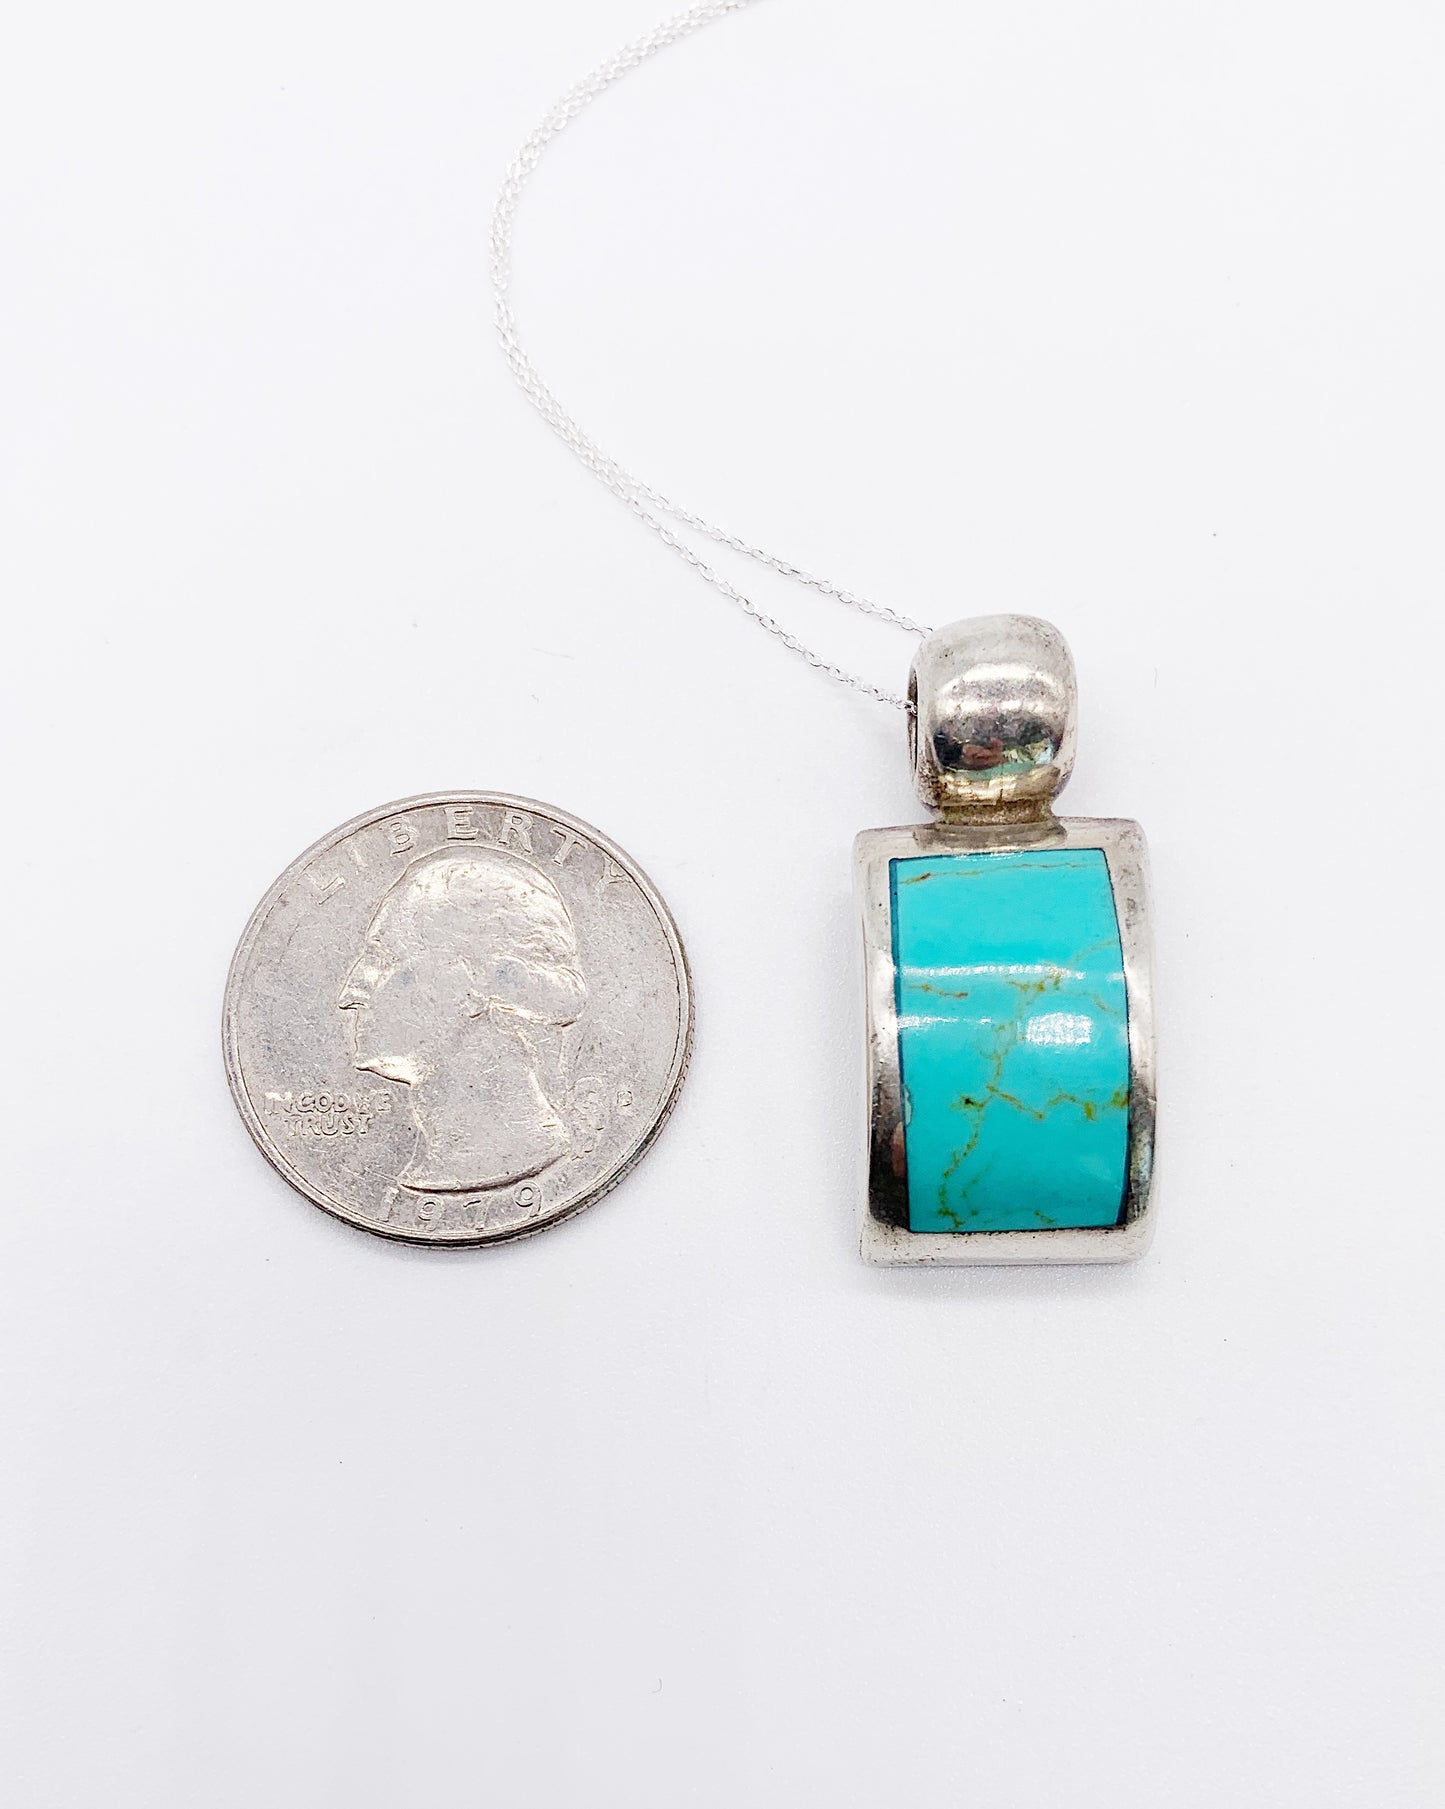 TURQUOISE BLOCK NECKLACE